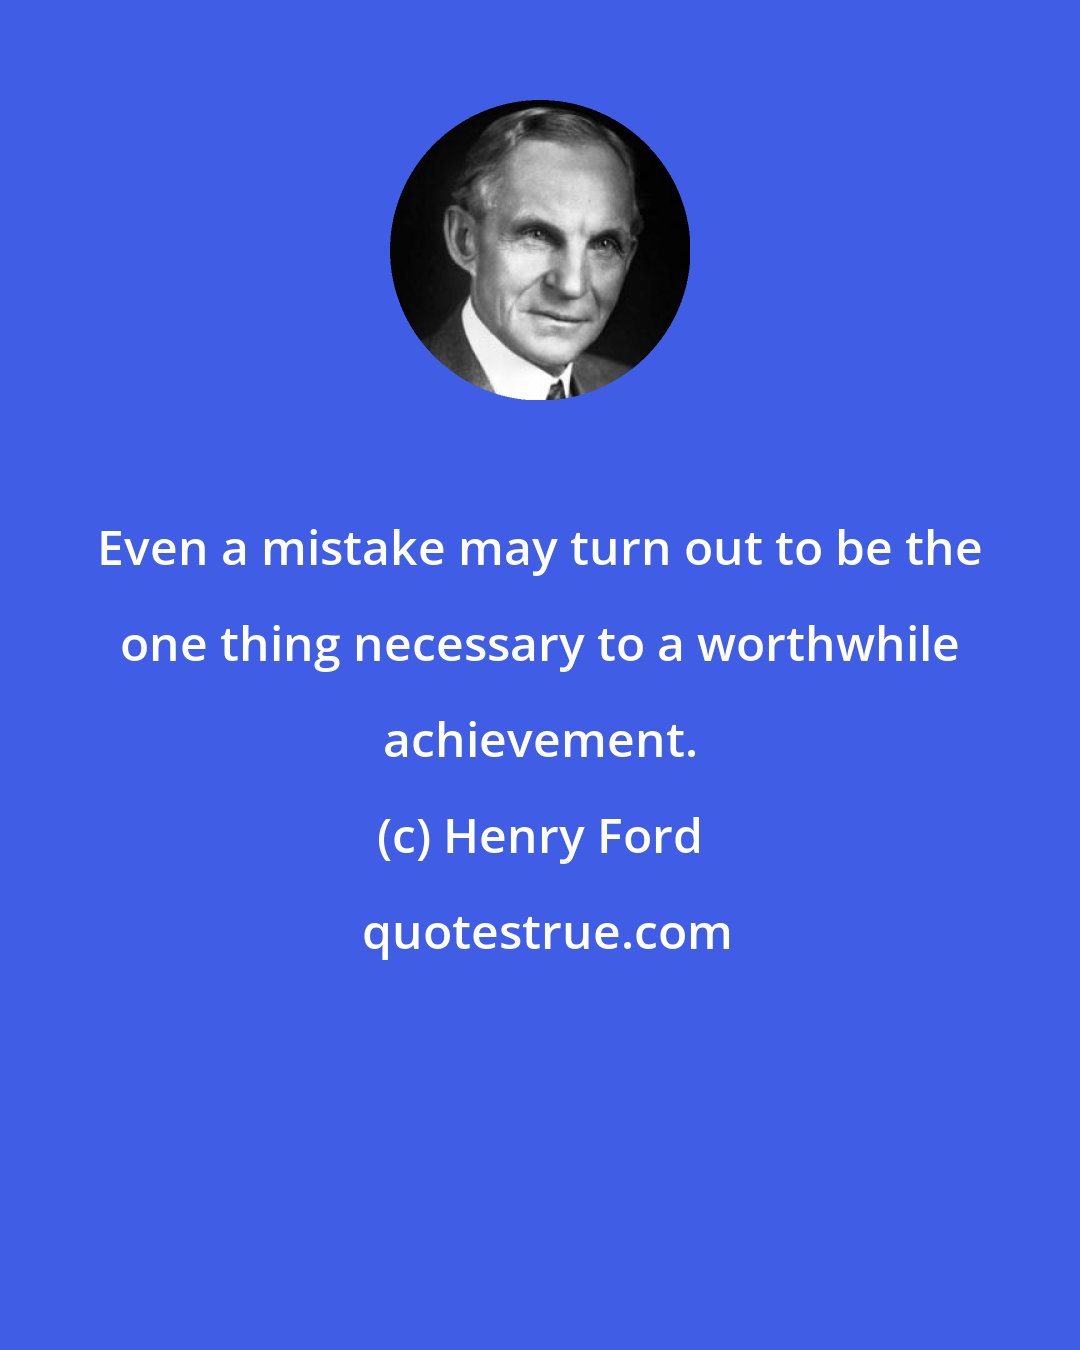 Henry Ford: Even a mistake may turn out to be the one thing necessary to a worthwhile achievement.